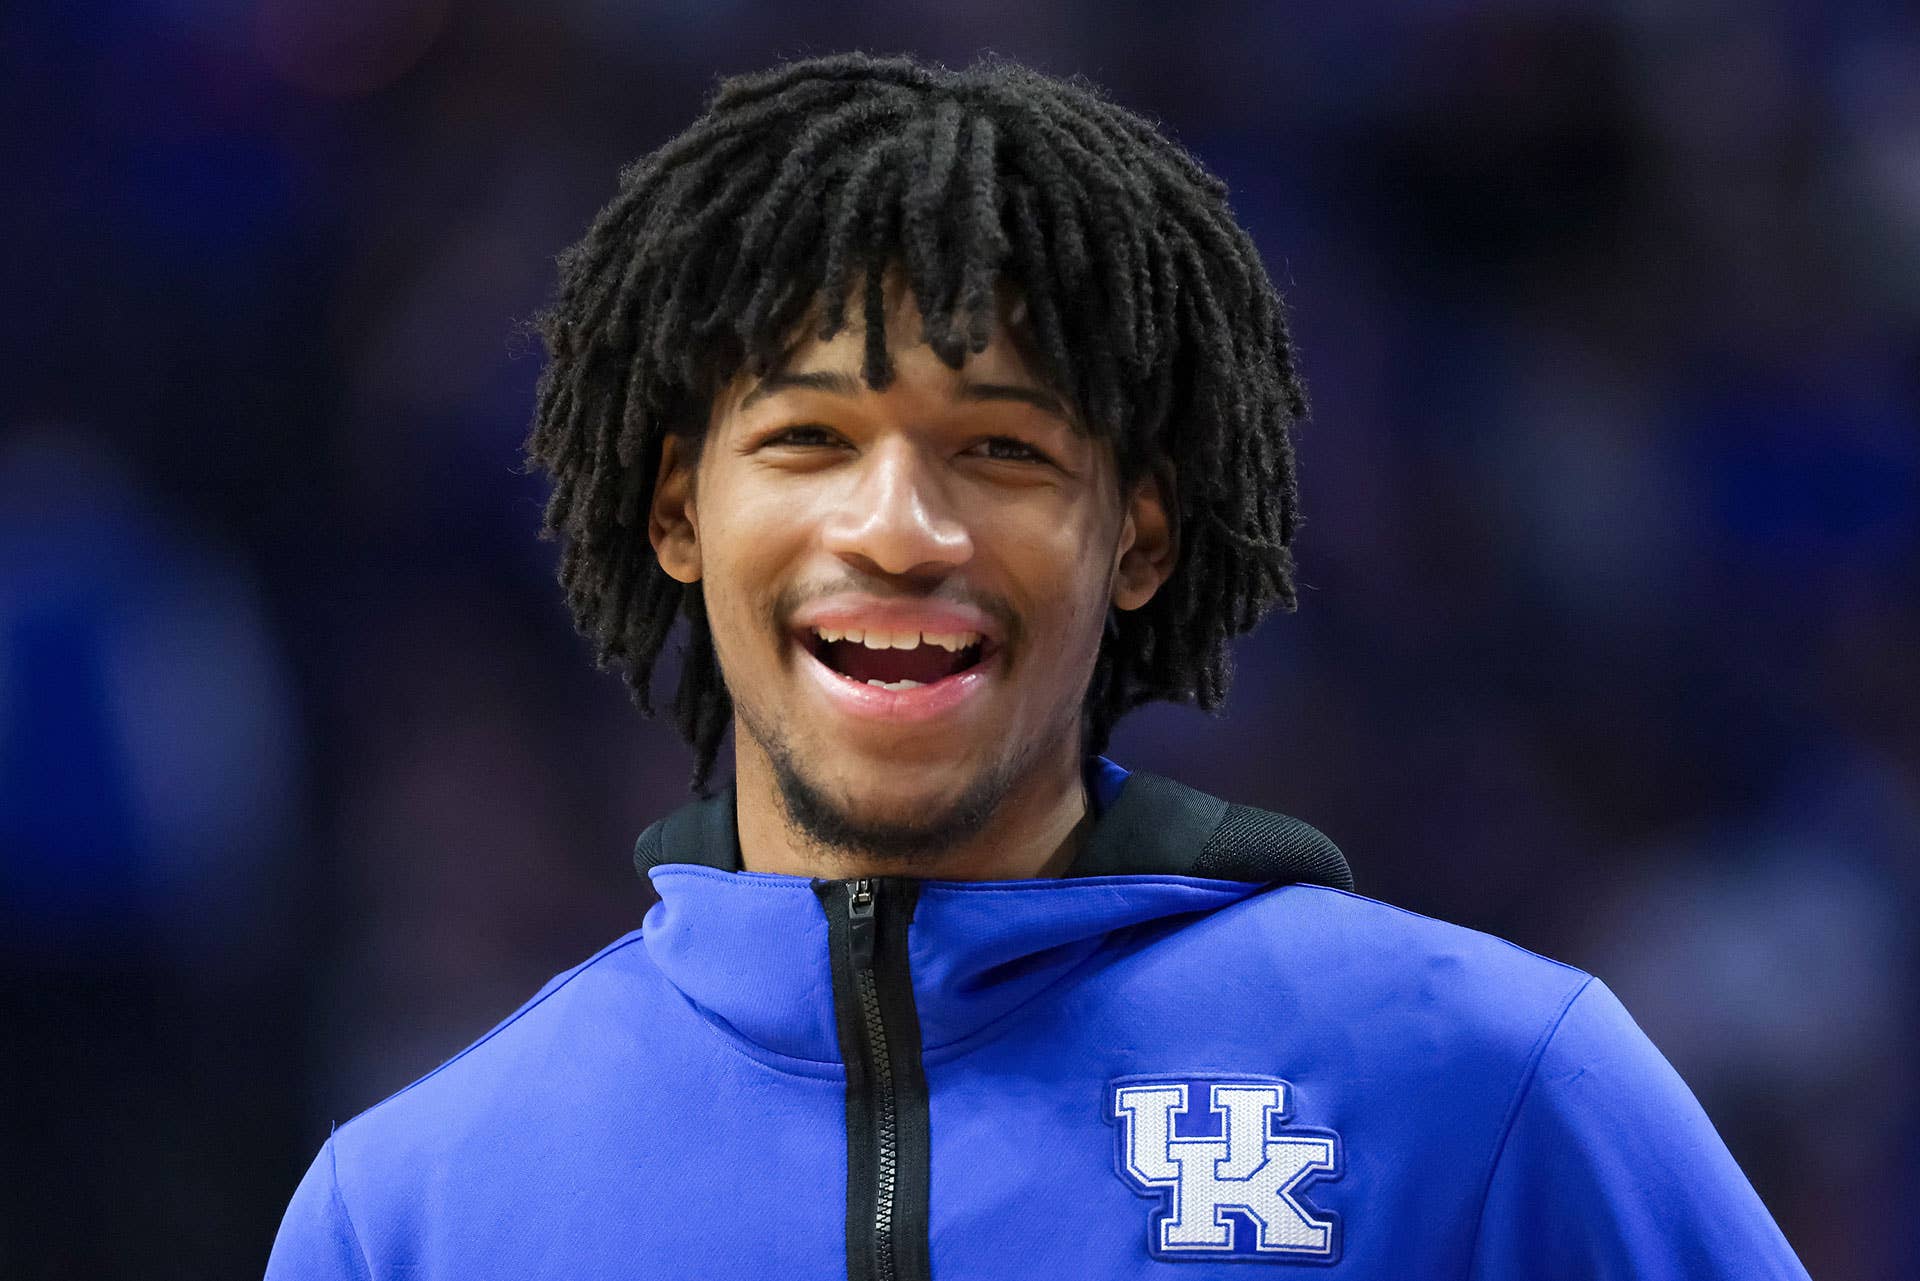 Shaedon Sharpe #21 of the Kentucky Wildcats looks on during halftime against the Florida Gators at Rupp Arena on February 12, 2022 in Lexington, Kentucky